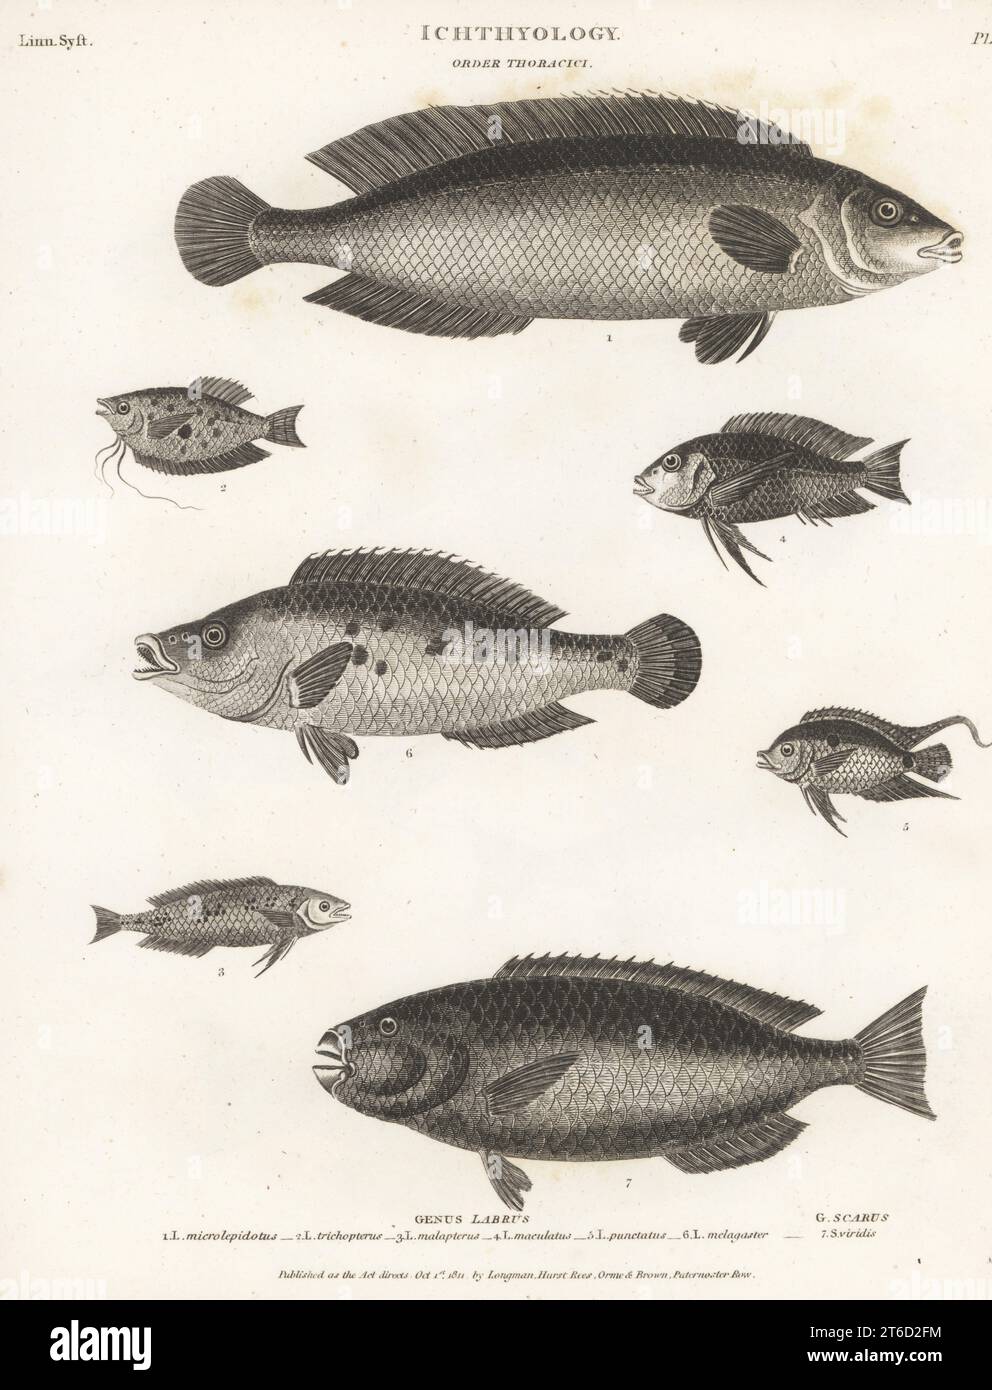 Cuckoo wrasse, Labrus mixtus 1, three-spot gourami, Trichopodus trichopterus 2, . black-eye thicklip wrasse, Hemigymnus melapterus 3, ballan wrasse, Labrus bergylta 4, Guyana leaffish, Polycentrus schomburgkii 5, Nile tilapia, Oreochromis niloticus 6, and parrotfish, Chlorurus japanensis 7. Copperplate engraving by Thomas Milton from Abraham Rees' Cyclopedia or Universal Dictionary of Arts, Sciences and Literature, Longman, Hurst, Rees, Orme and Brown, Paternoster Row, London, October 1, 1811. Stock Photo